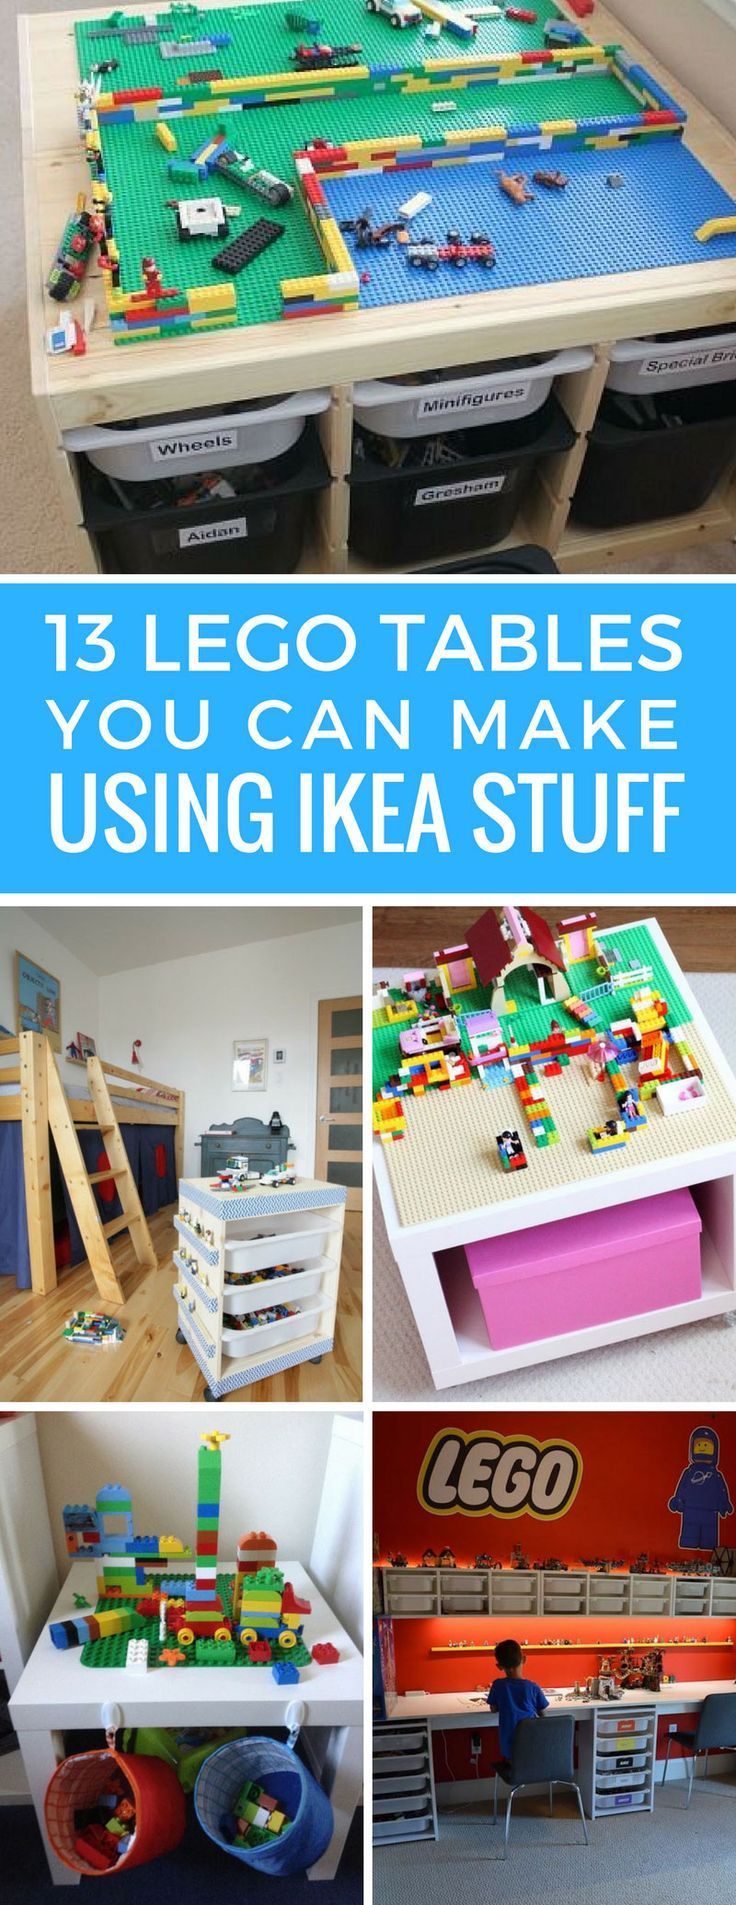 13 Awesome IKEA LEGO Tables that Your Kids Will Go Crazy Over!